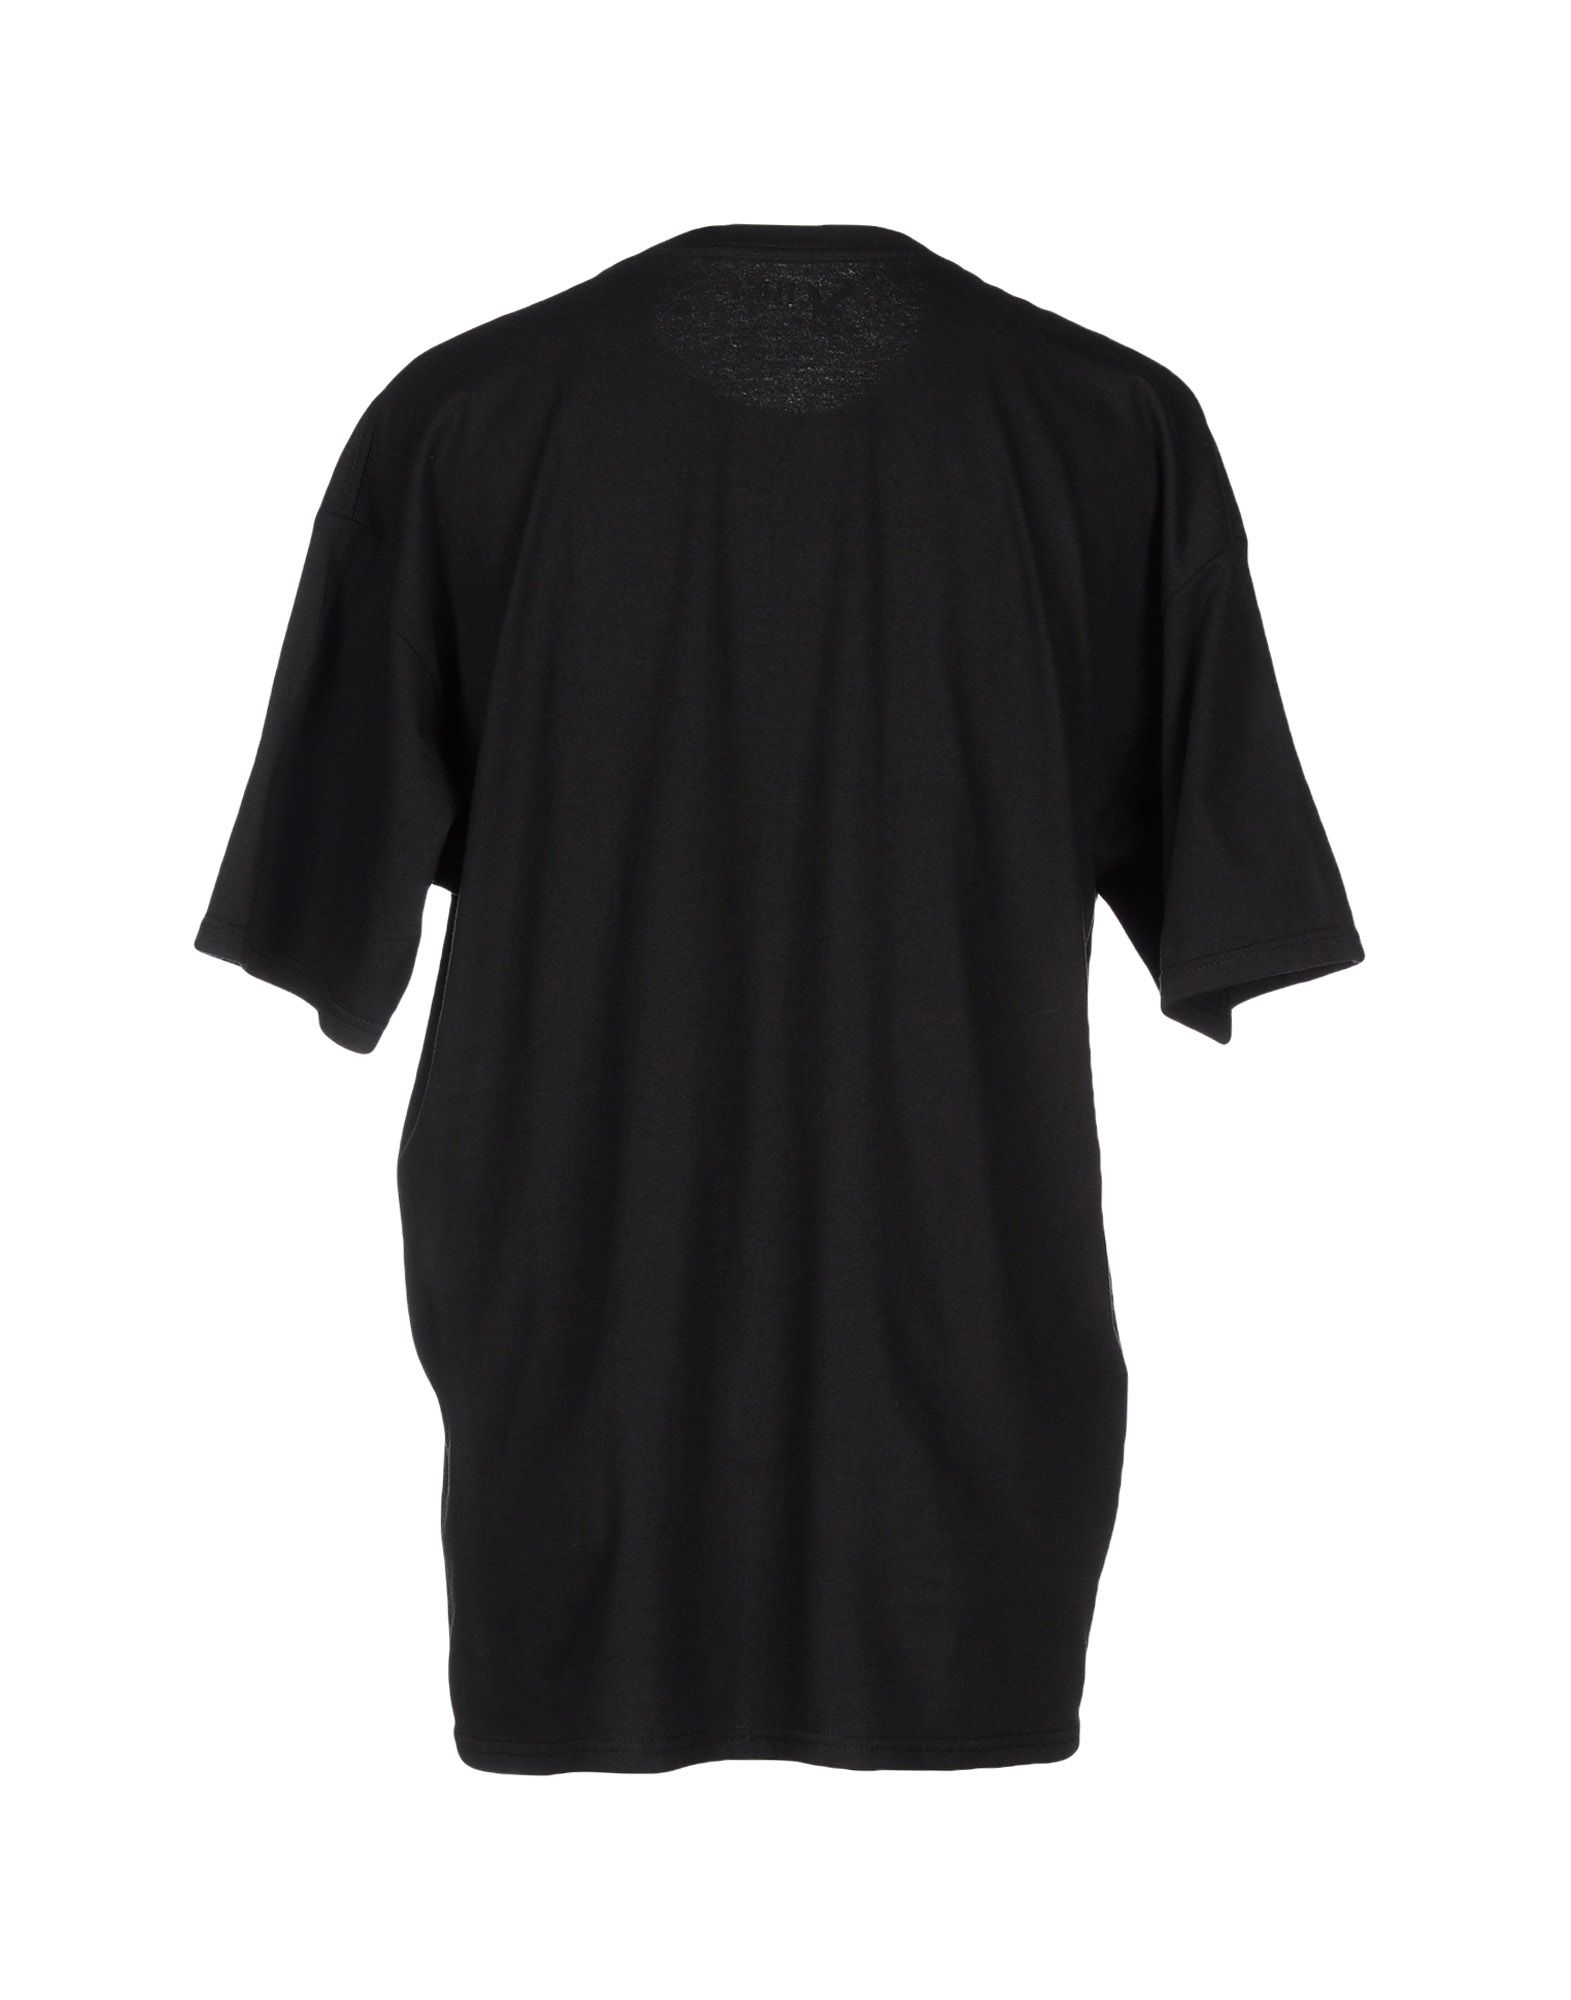 Lyst - Fuct T-shirt in Black for Men